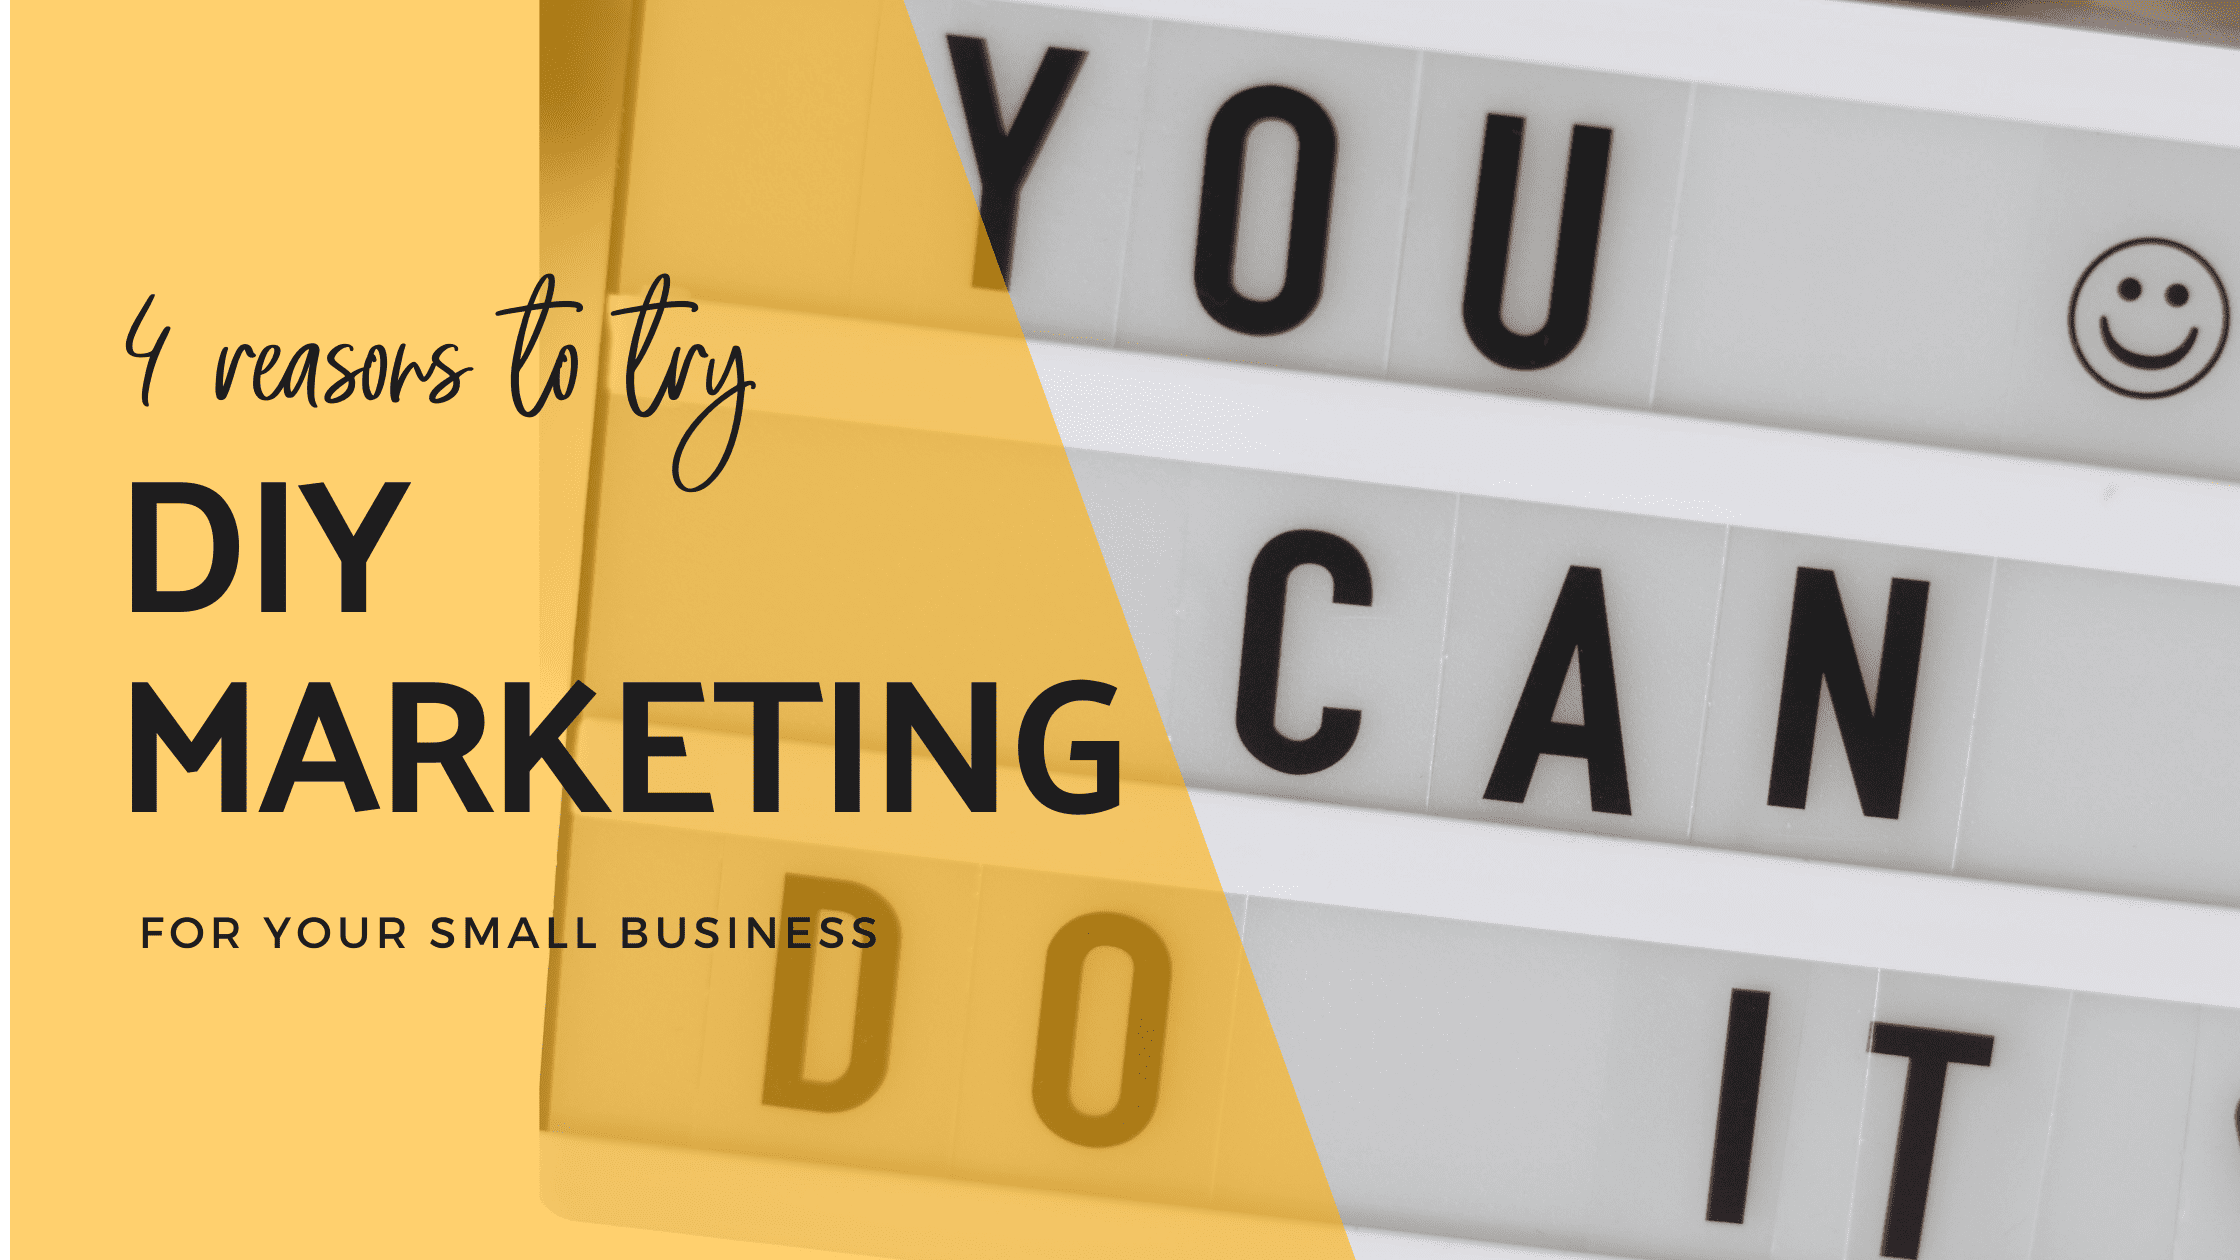 4 Reasons You Should Try DIY Marketing for Small Business